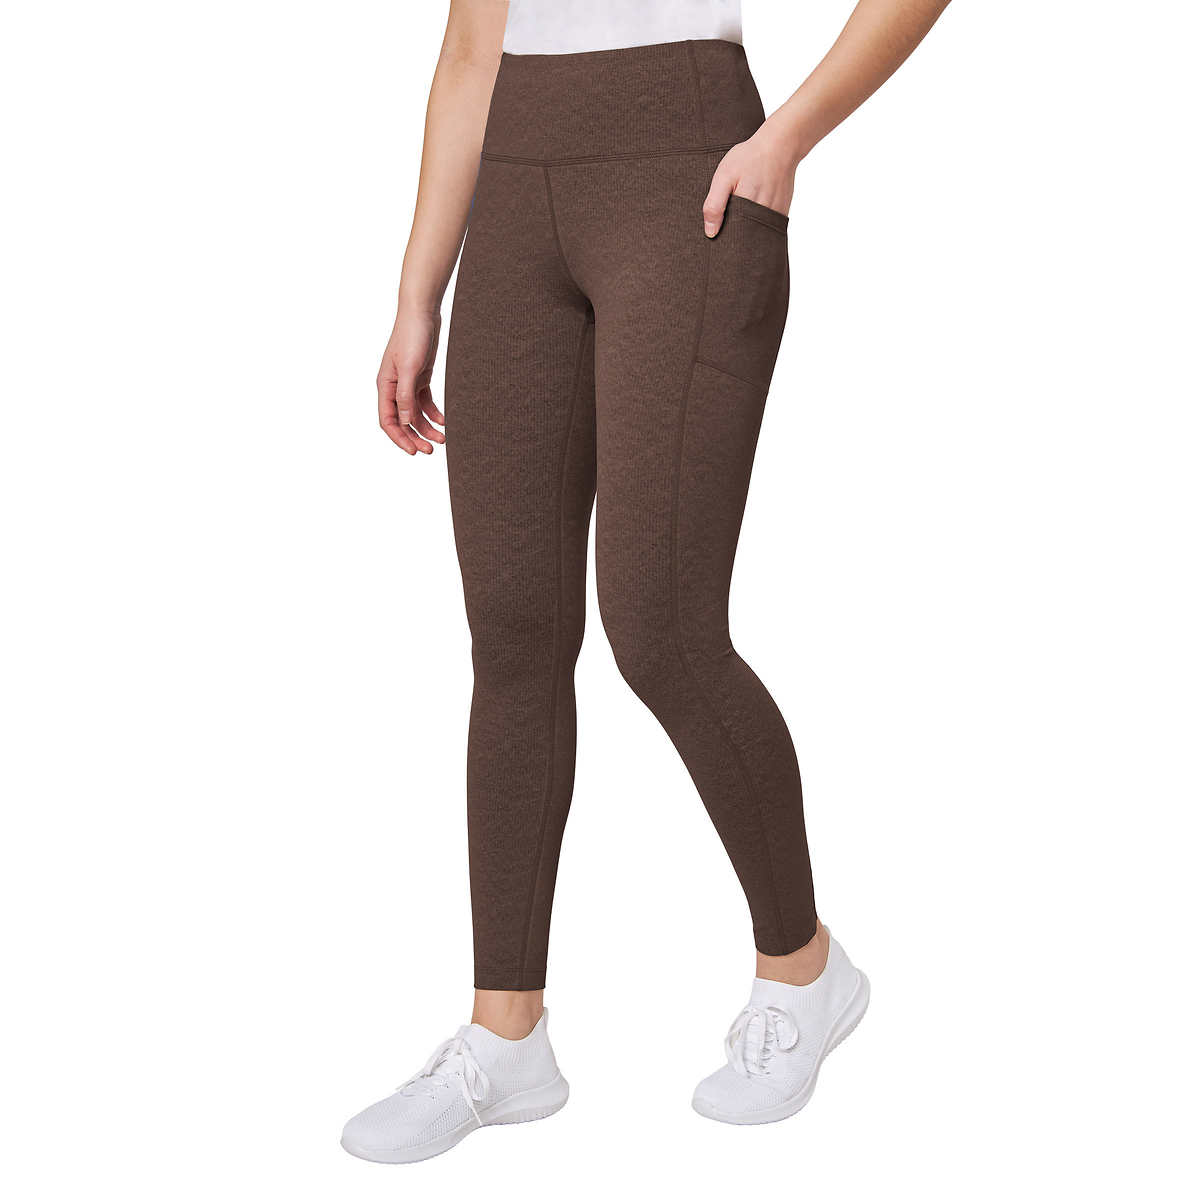 Mondetta Ladies Active Lifestyle Apparel. Save up to 25% on select